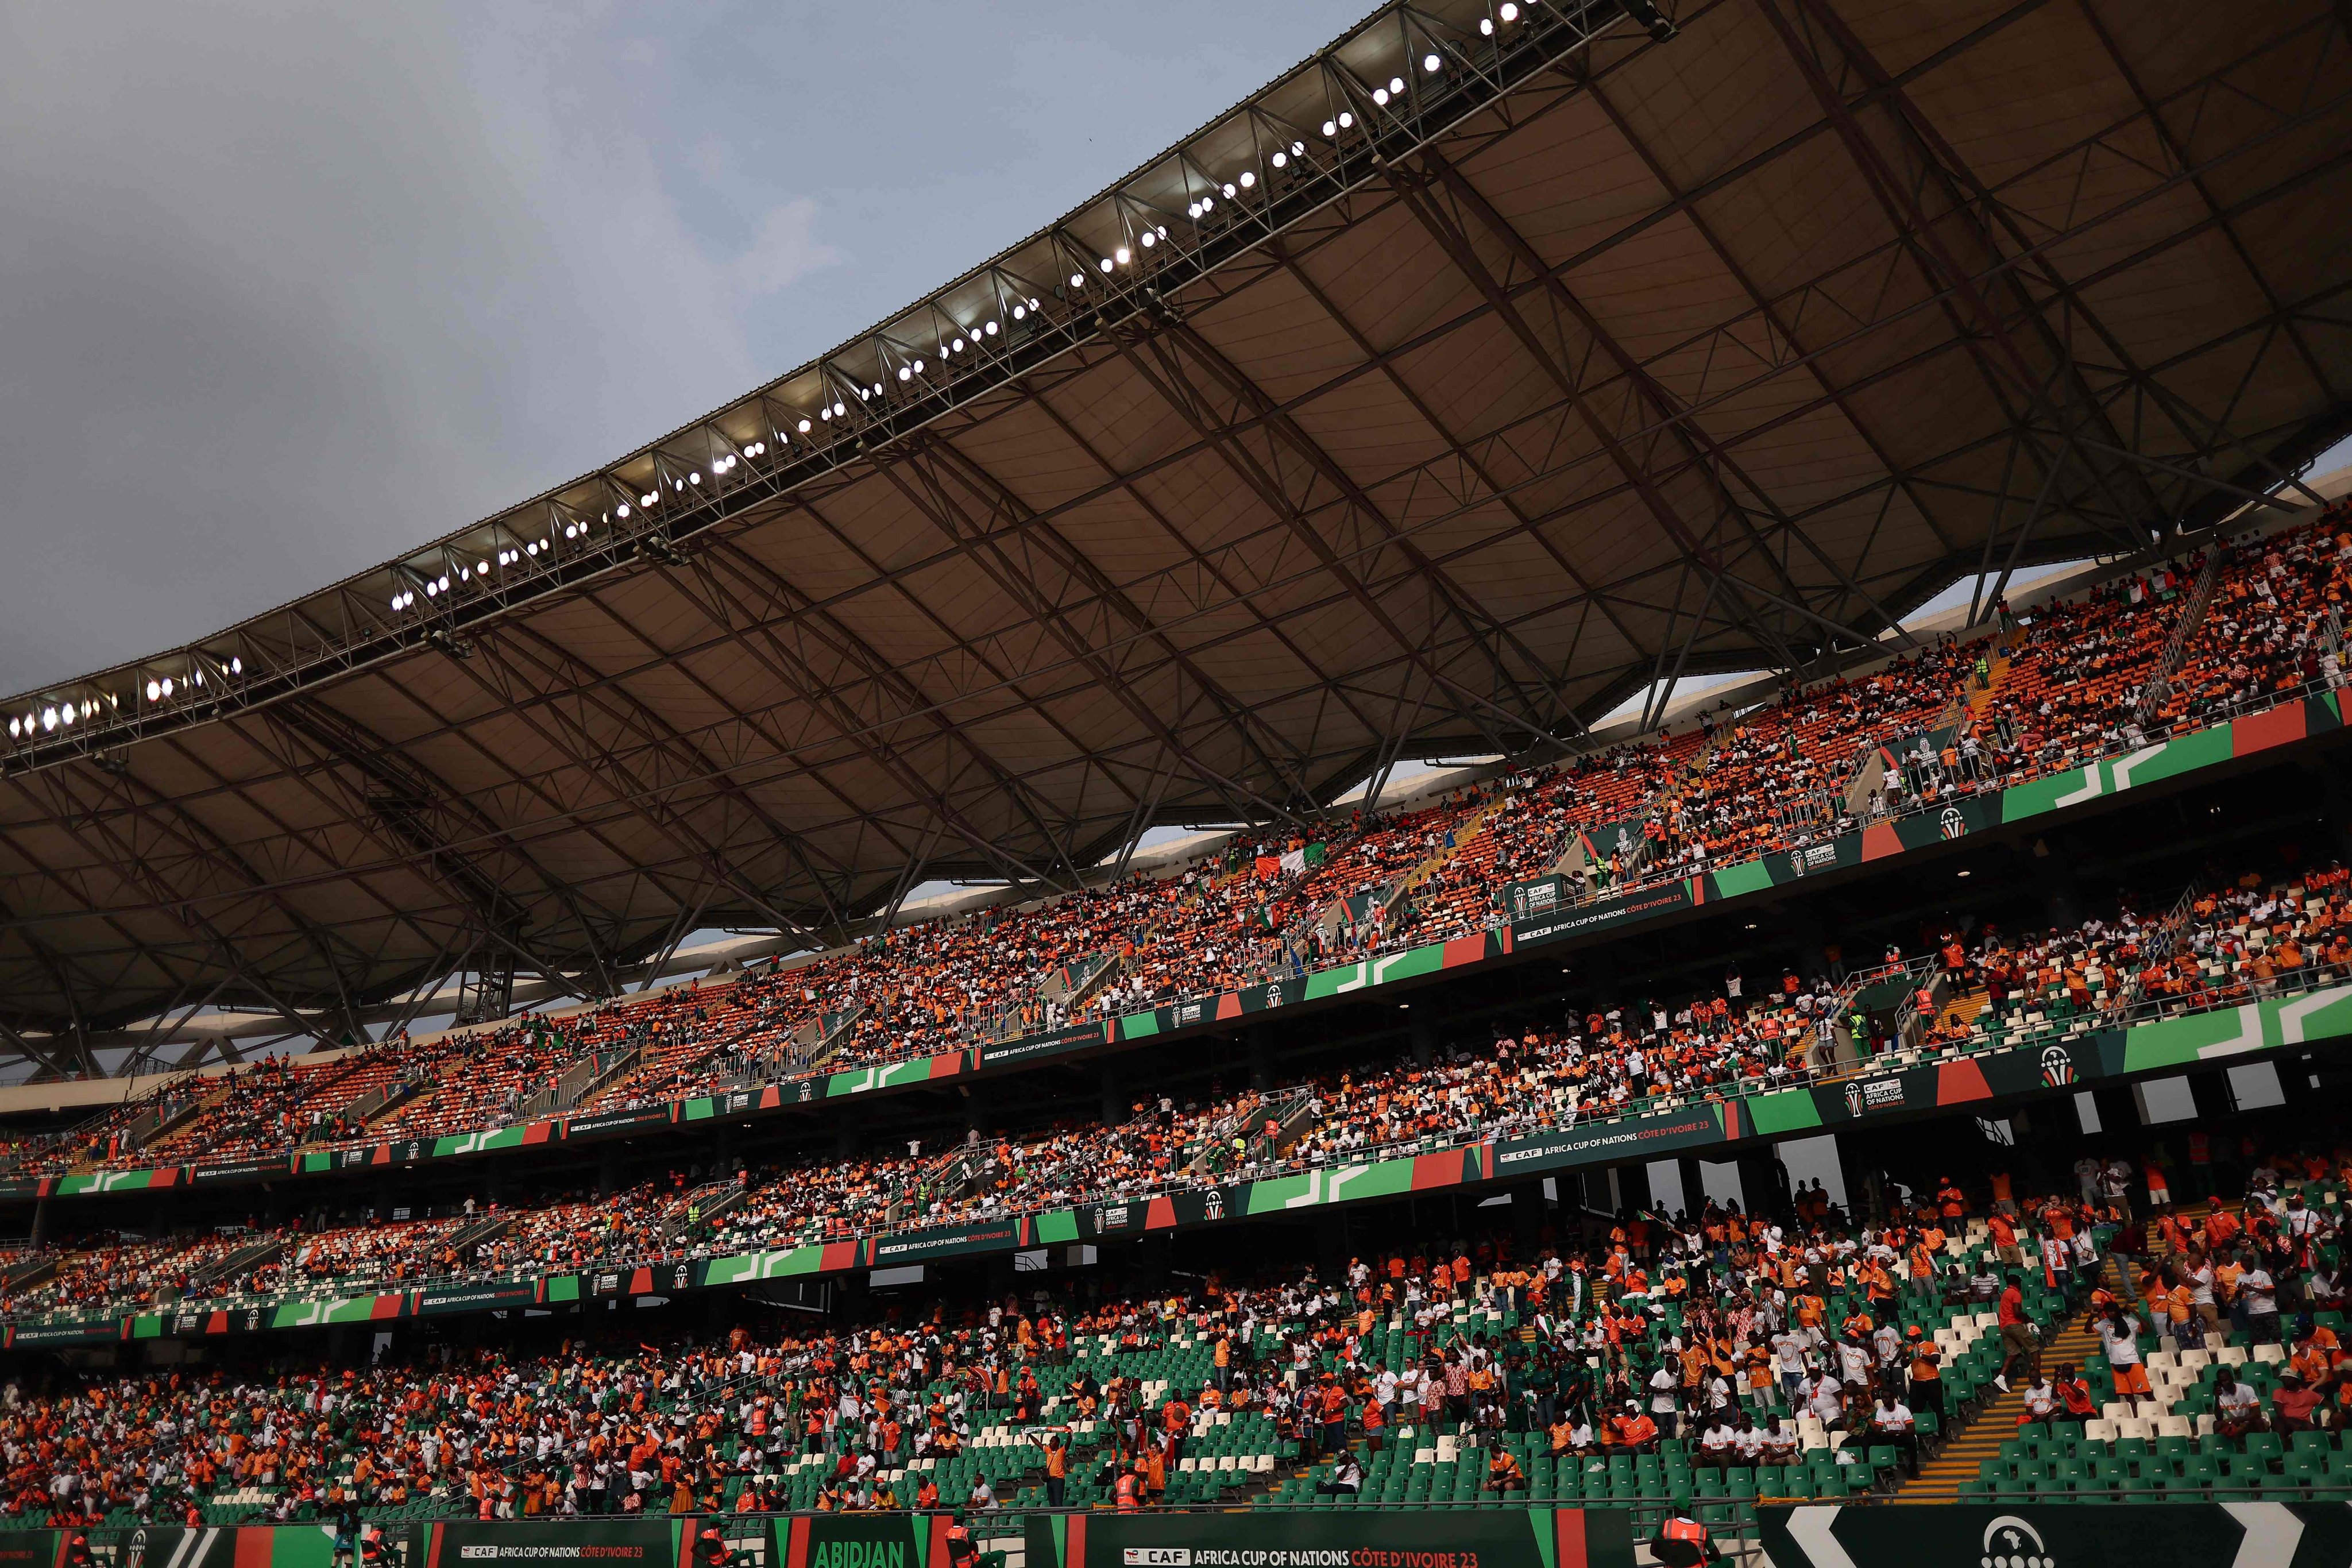 A packed Alassane Ouattara Olympic Stadium ahead of an Africa Cup of Nations Group A football match between hosts Ivory Coast and Nigeria on January 18. The 60,000-seat stadium, Ivory Coast’s largest, was funded by China Aid. Photo: AFP